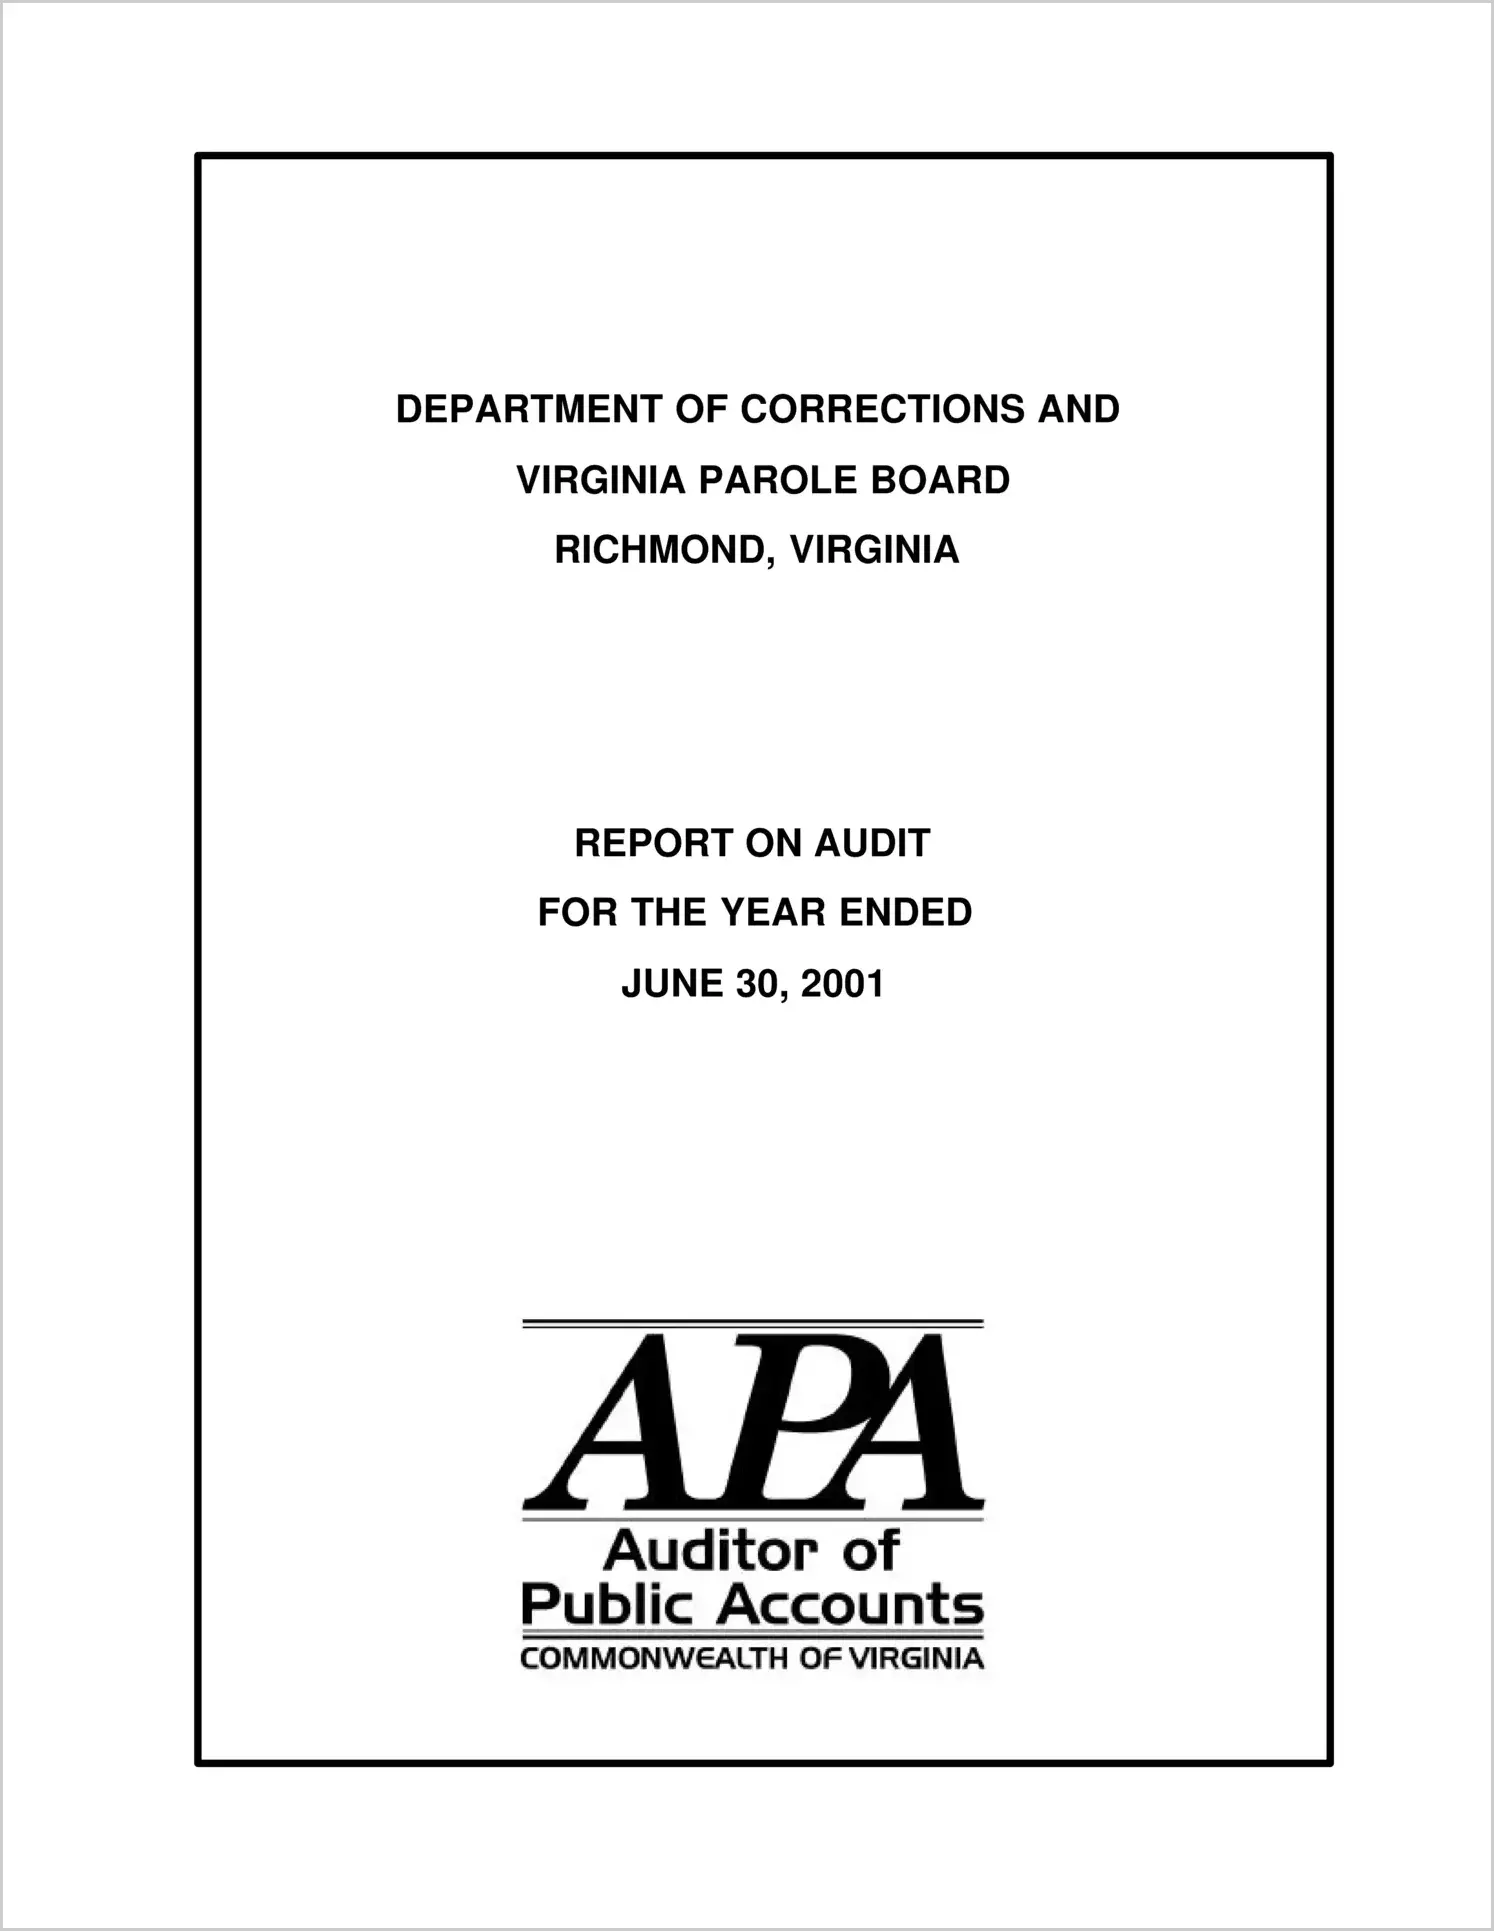 Department of Corrections and Virginia Parole Board for the year ended June 30, 2001